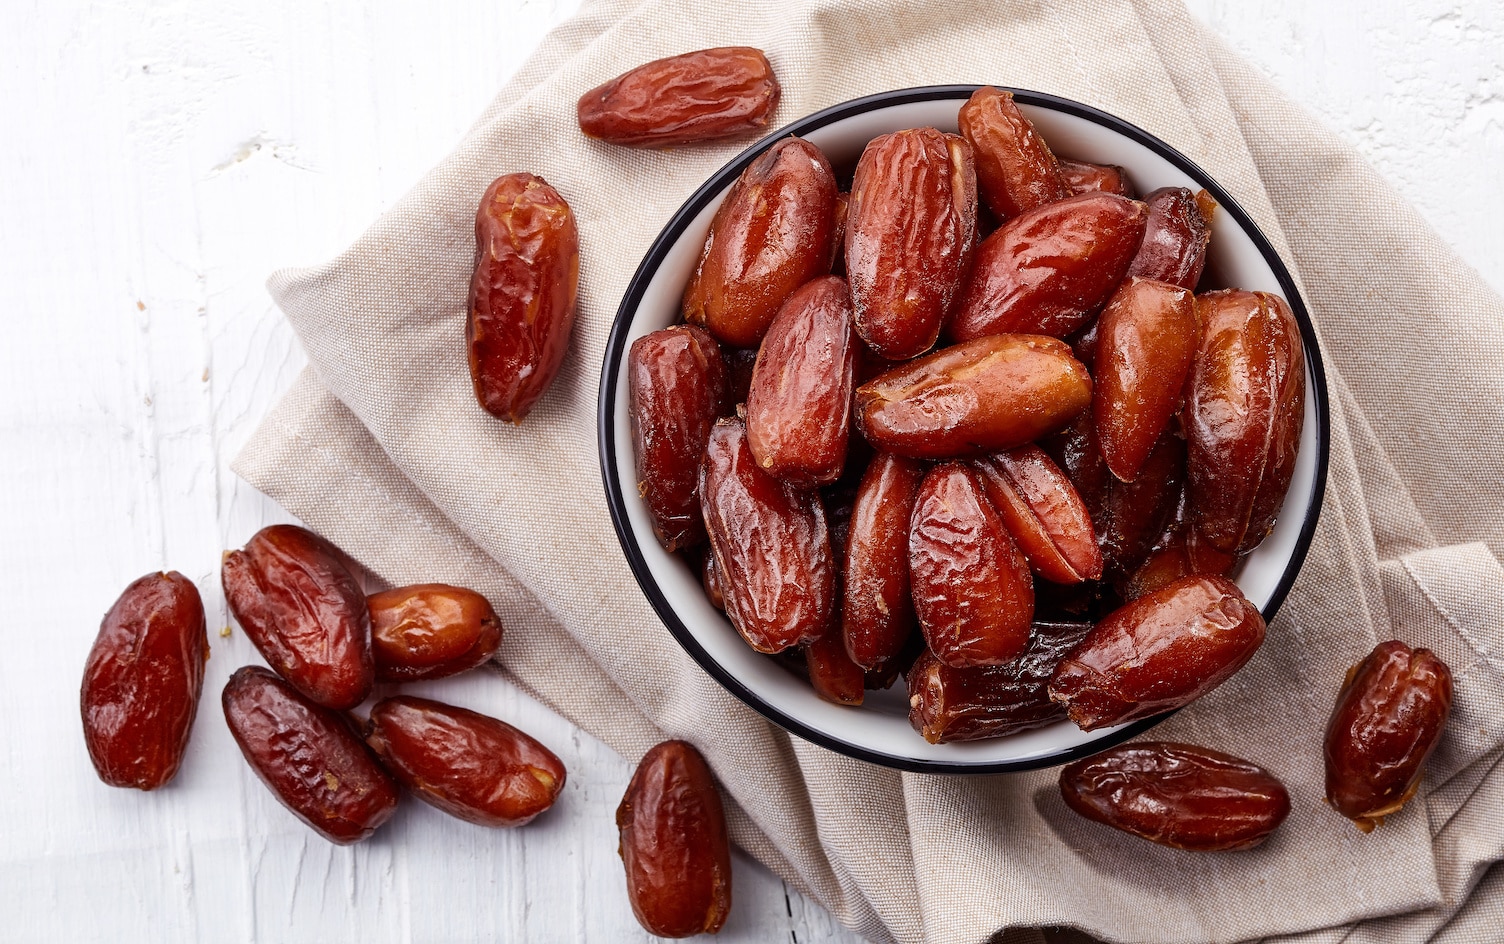 How to Eat Dates | Top 10 Drool-worthy Ways